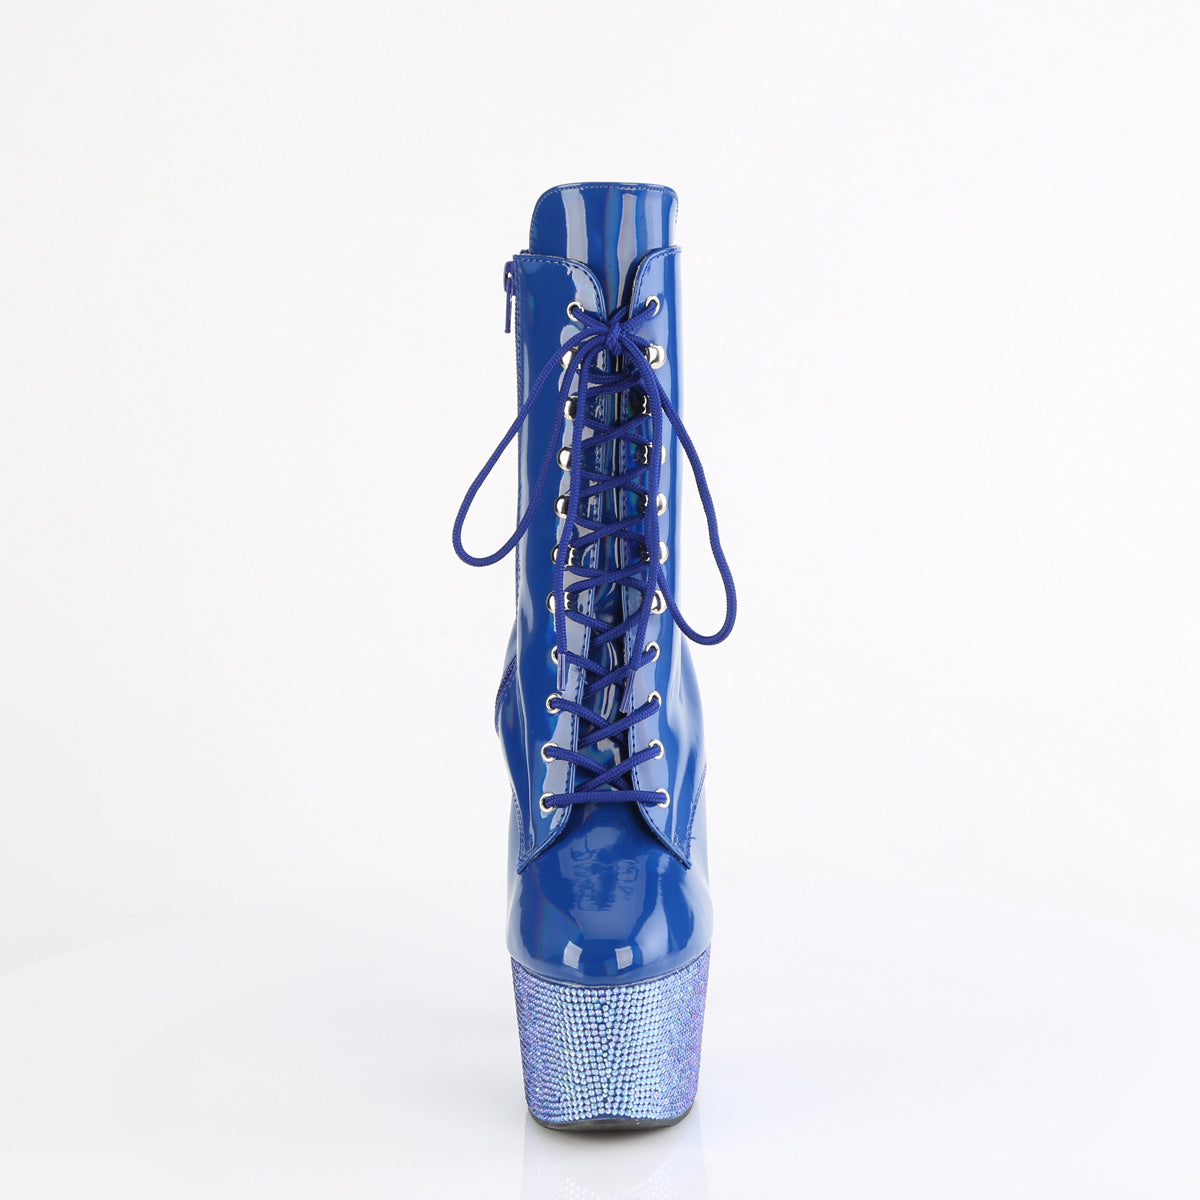 BEJEWELED-1020-7 Calf High Boots Blue Multi view 5